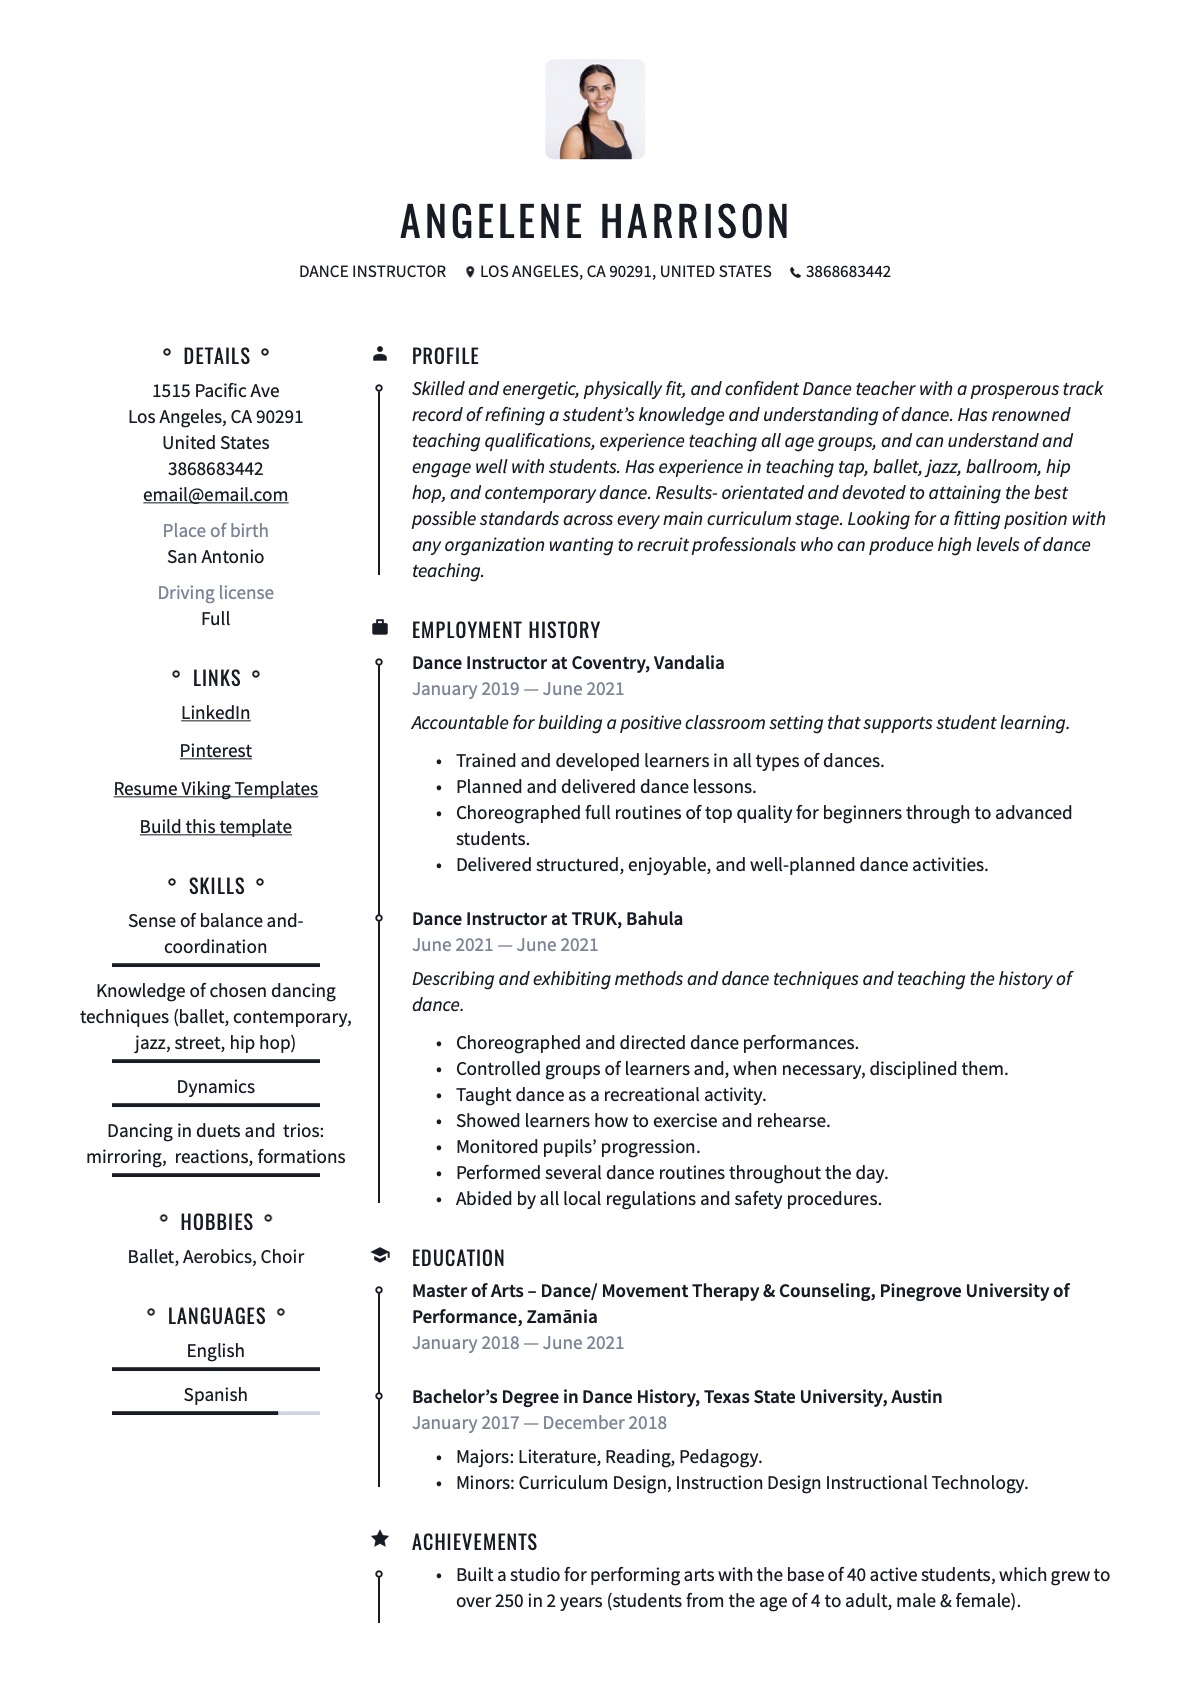 Professional Dance Instructor Resume Example